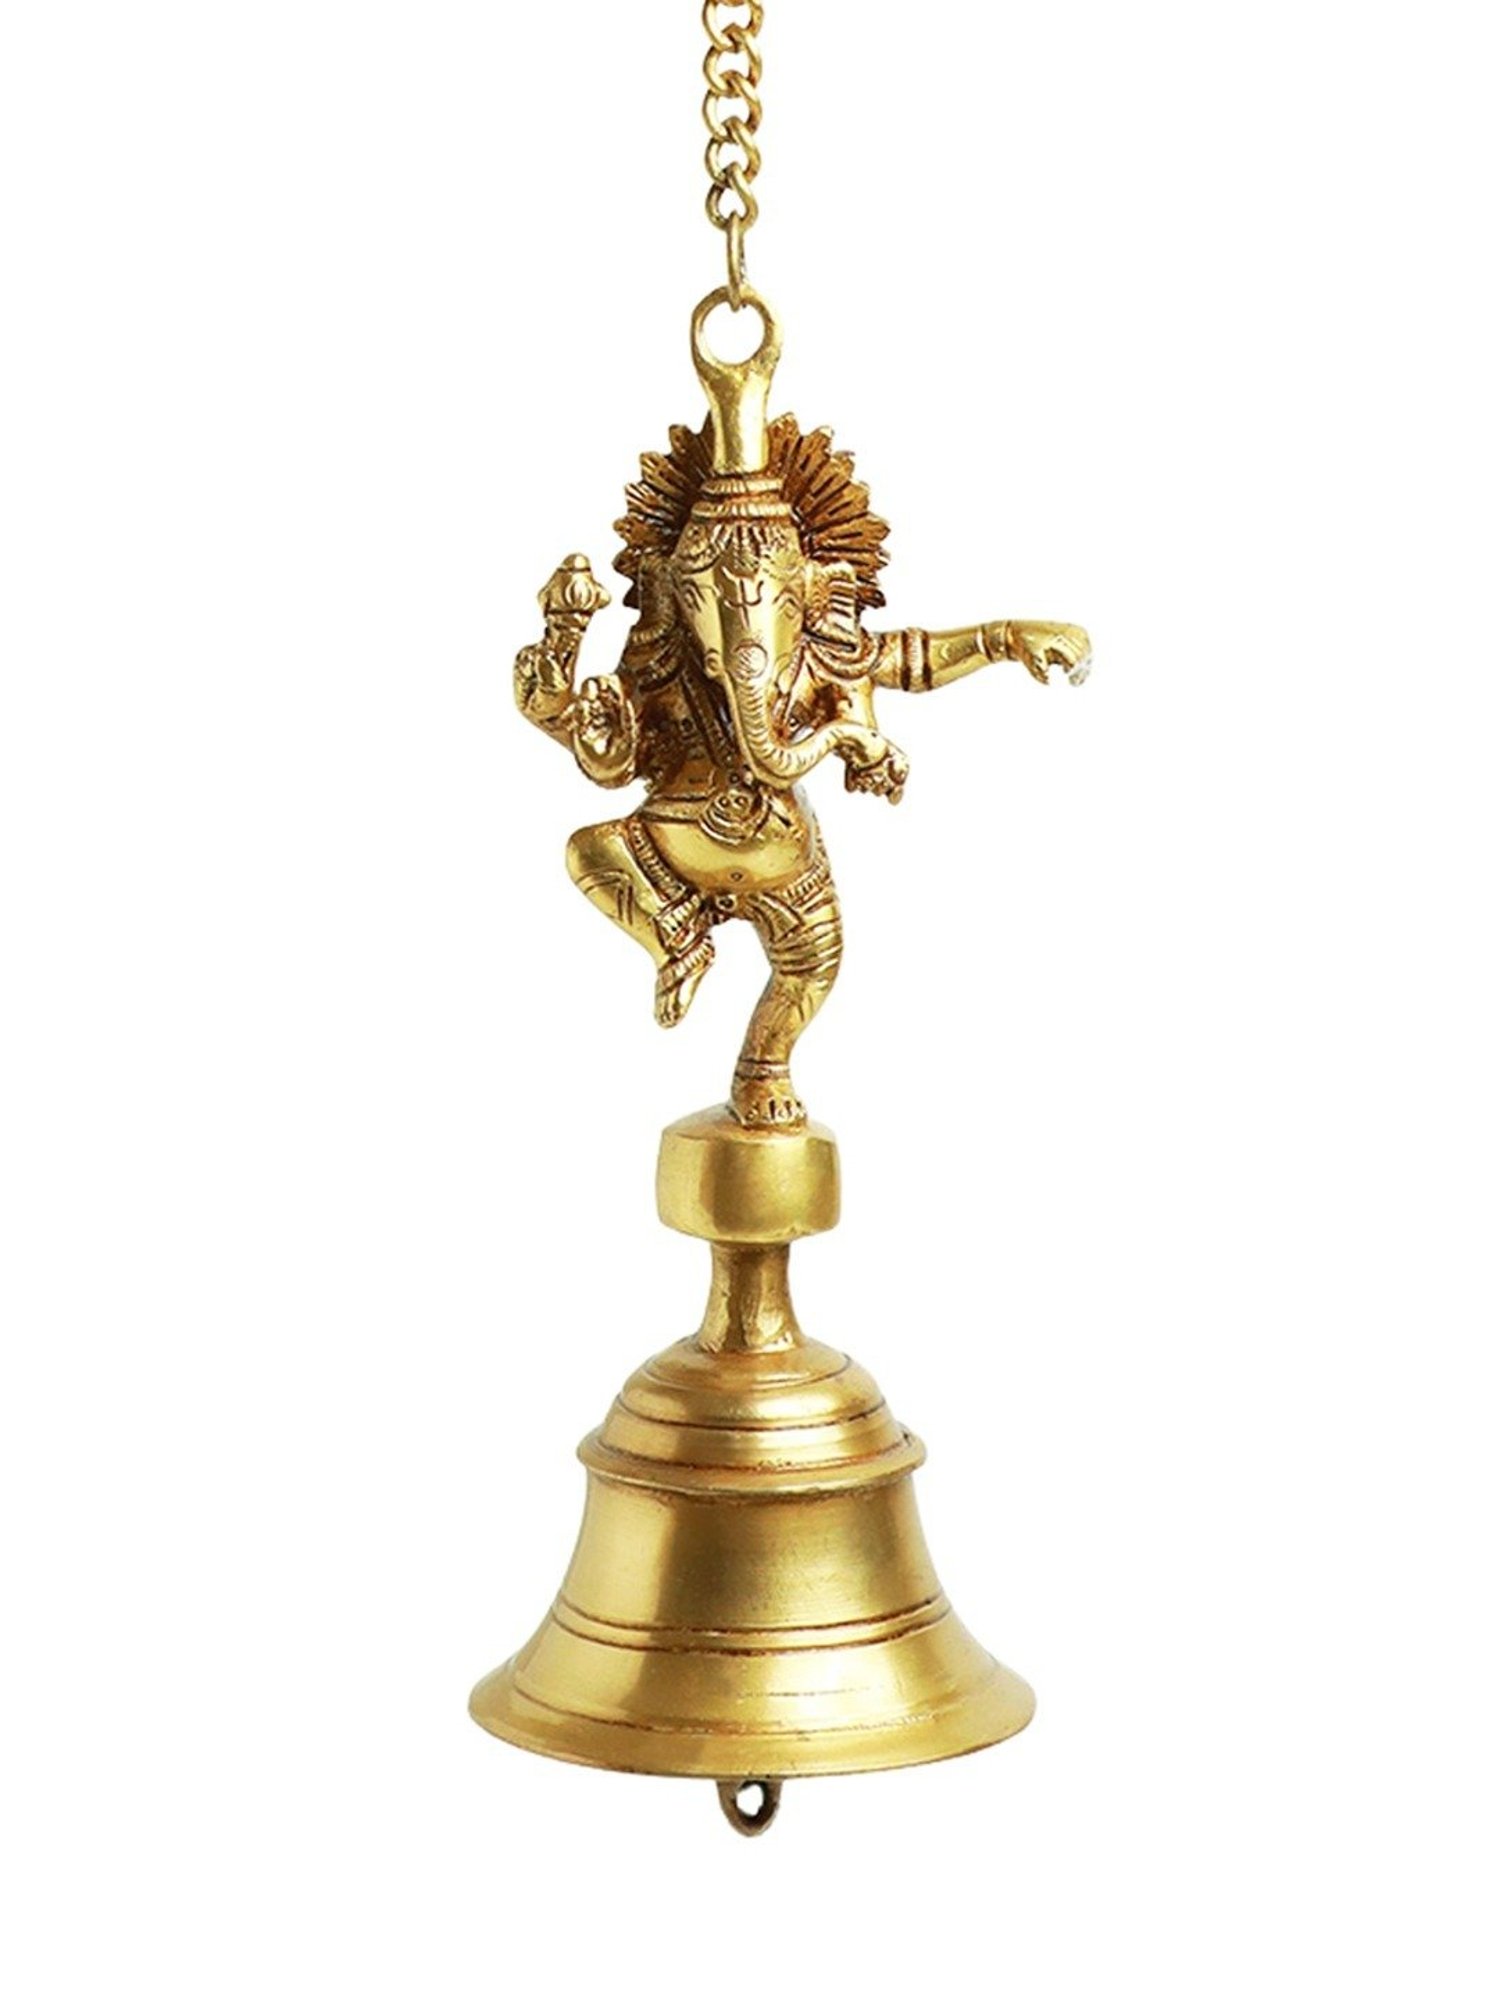 Buy ExclusiveLane Elegant Peacock Hand-Etched Gold Brass Hanging Bell at  Best Price @ Tata CLiQ